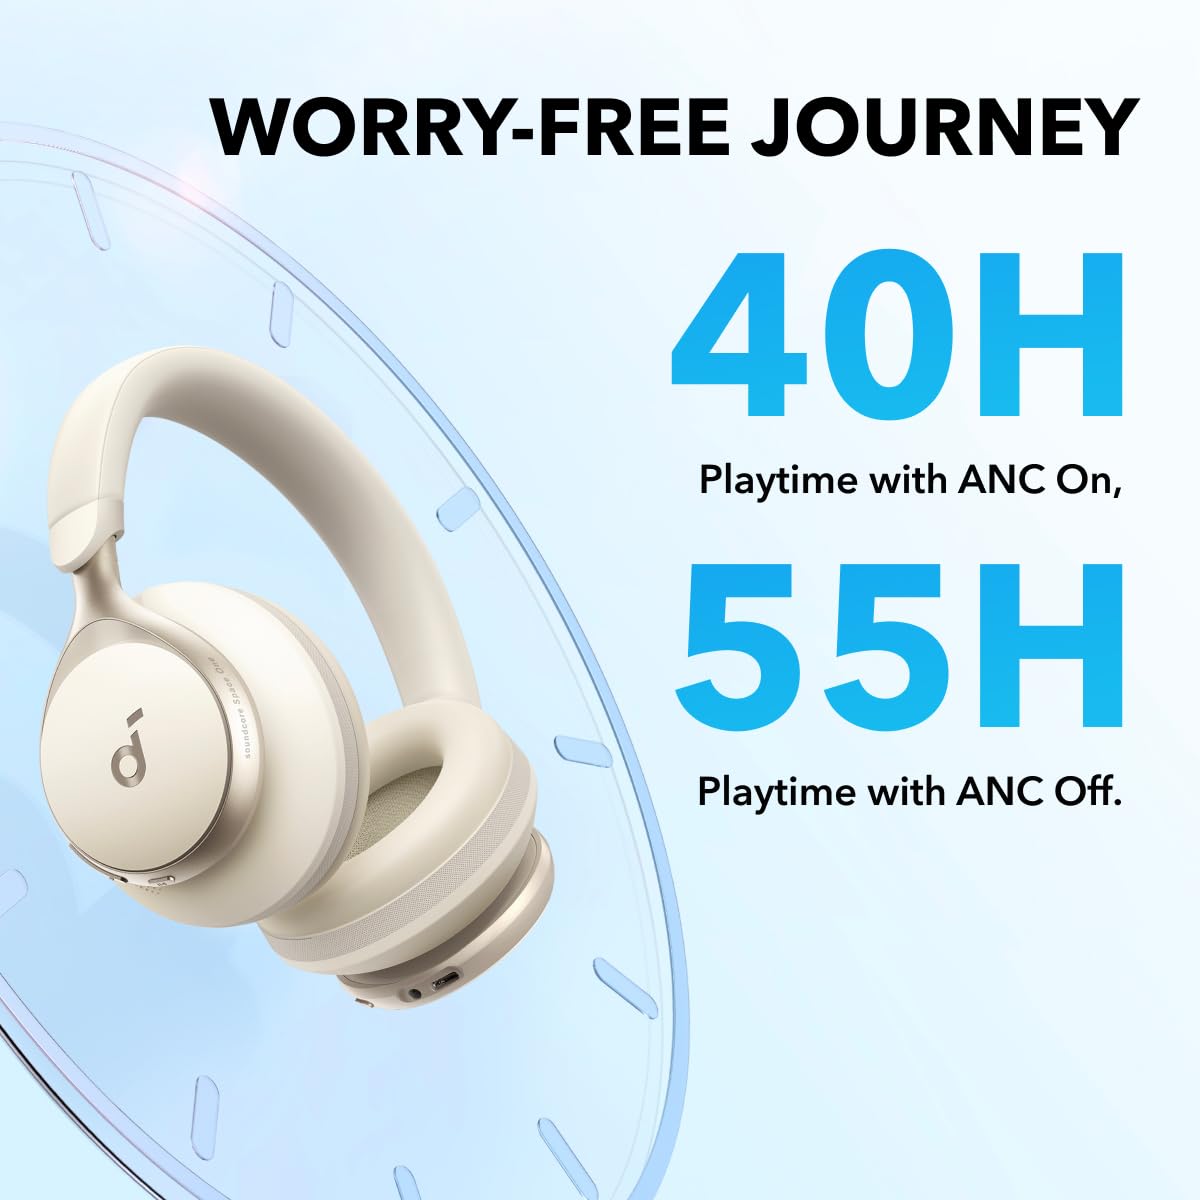 Anker soundcore Space One Headphone ANC